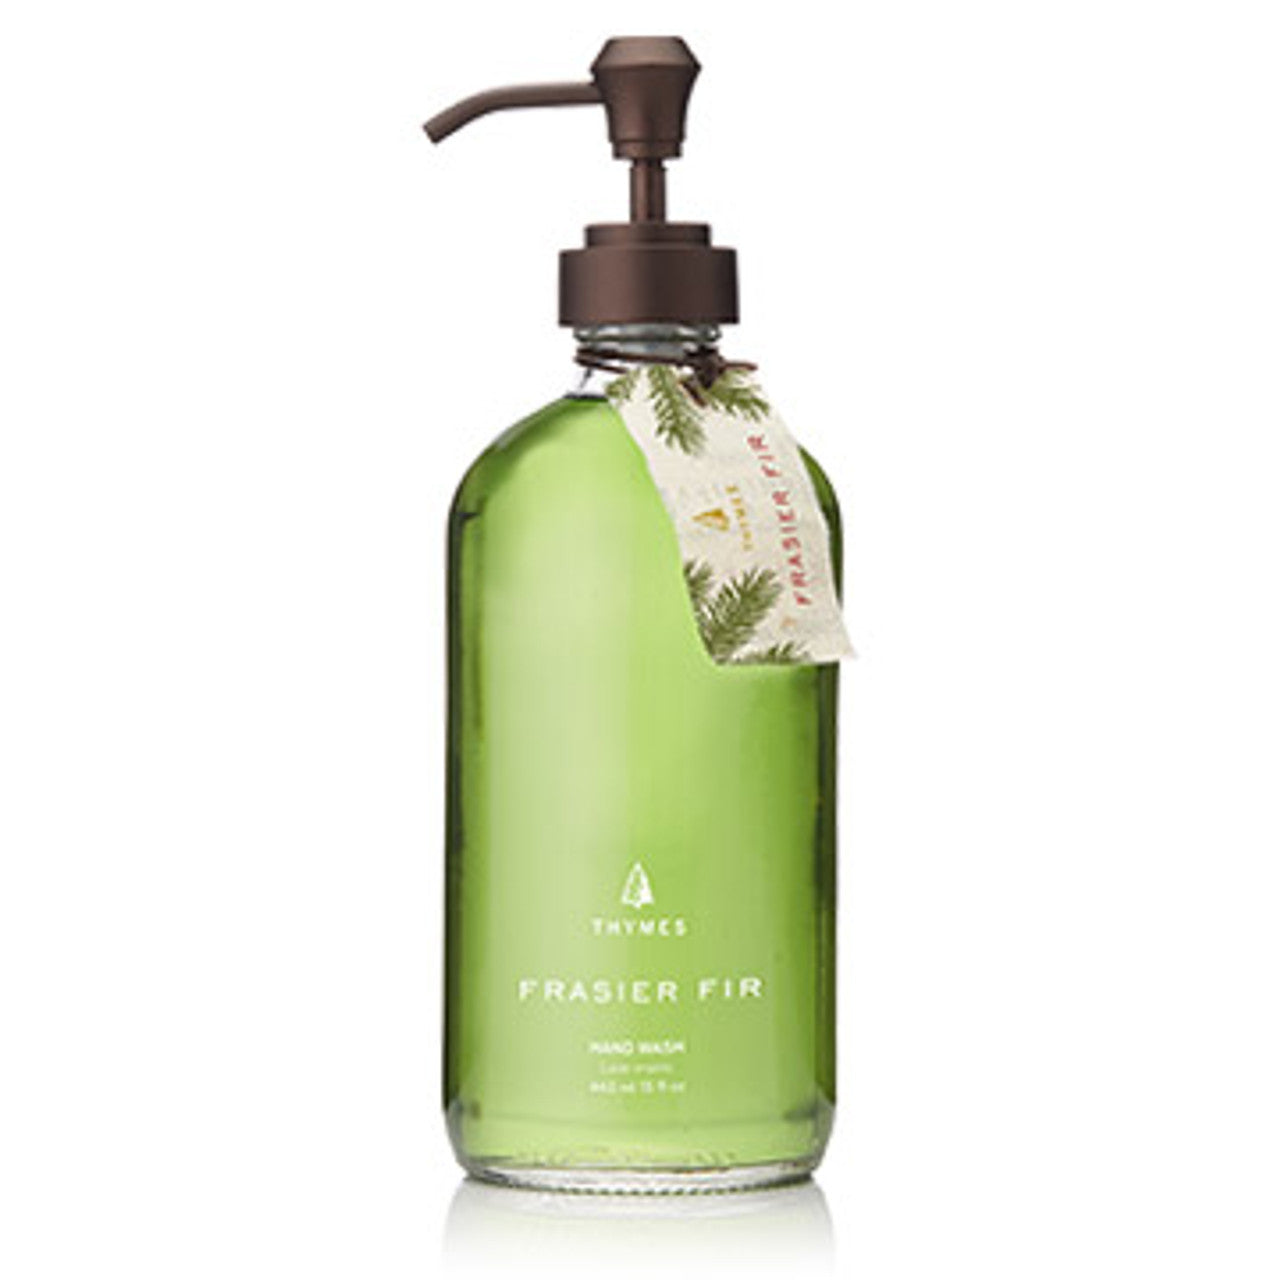 Thymes Frasier Fir Hand Wash-Hand Wash-Thymes-The Village Shoppe, Women’s Fashion Boutique, Shop Online and In Store - Located in Muscle Shoals, AL.